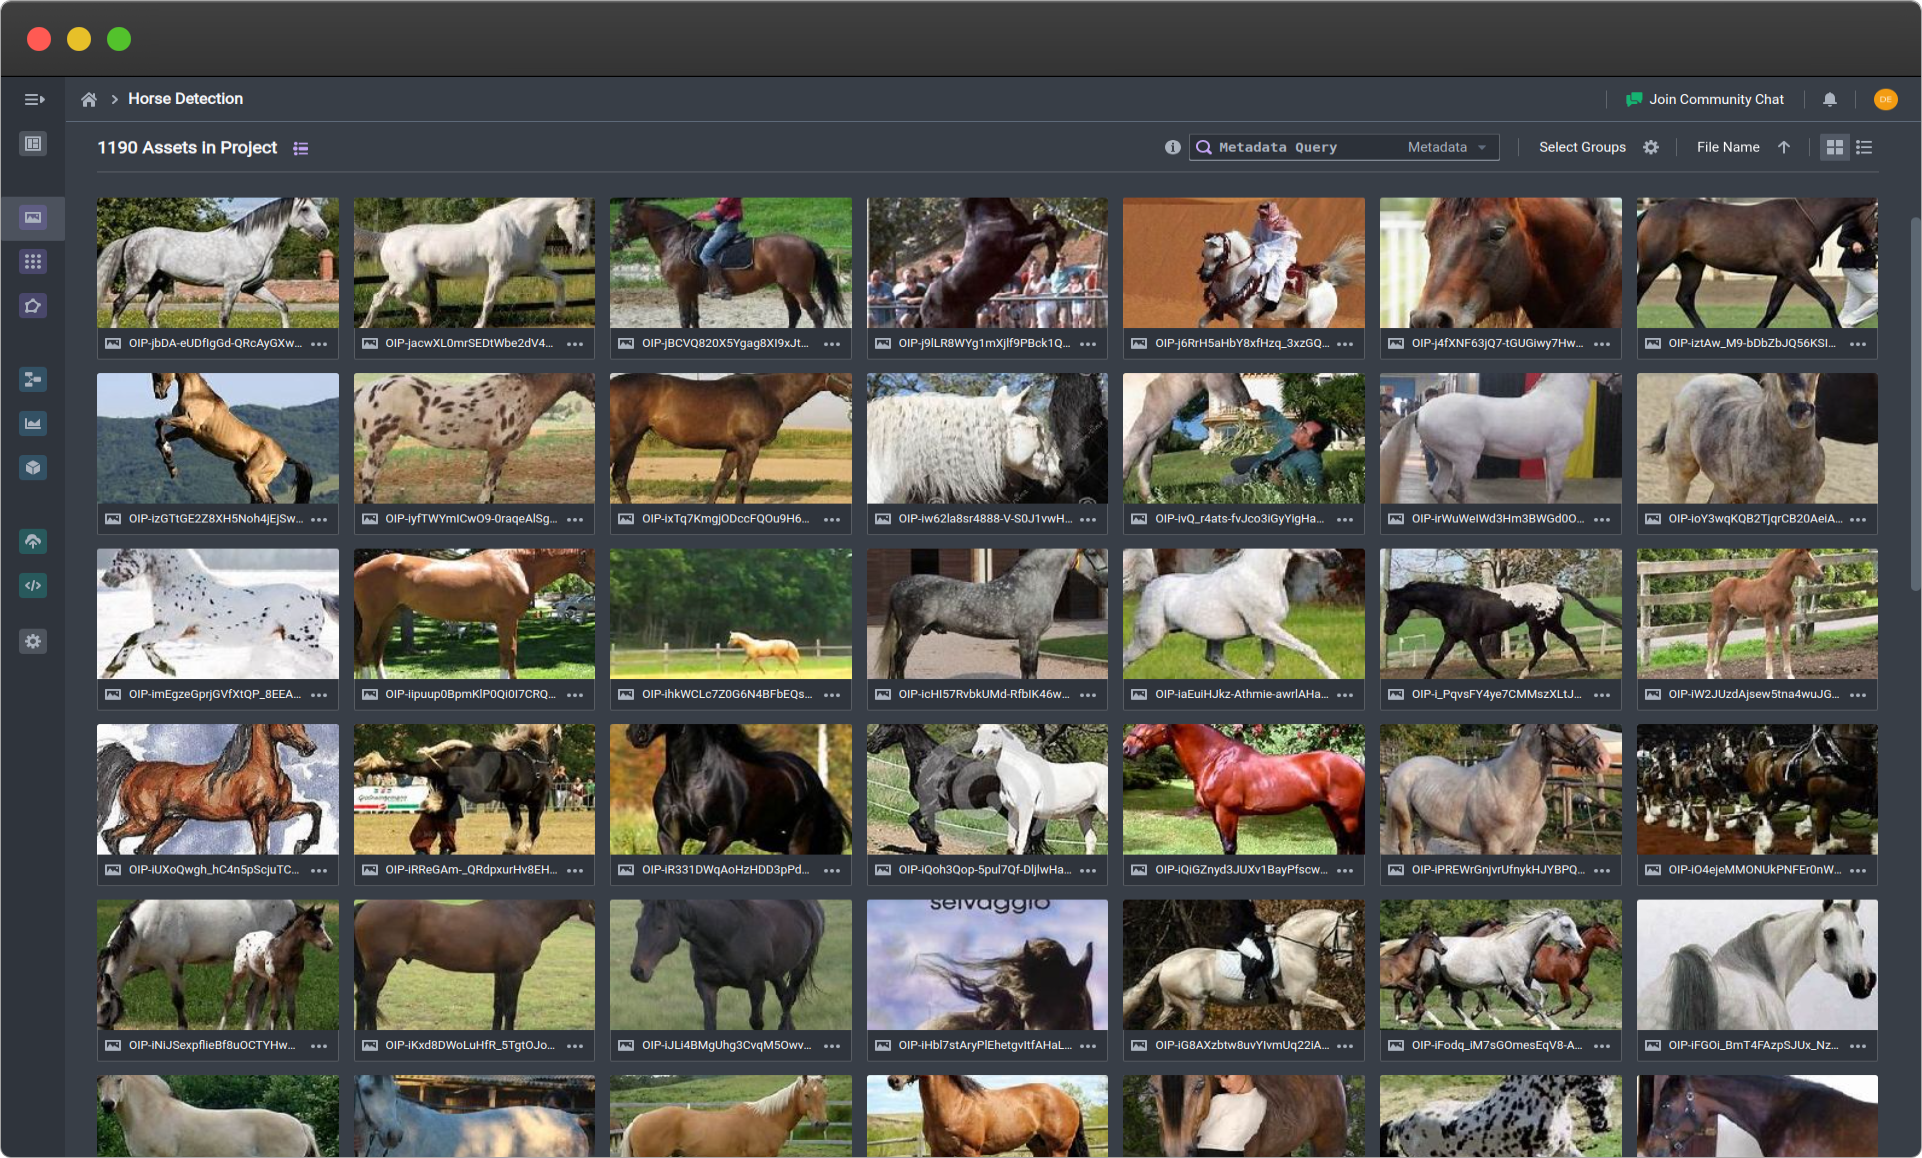 Example dataset of horses (click image to expand)